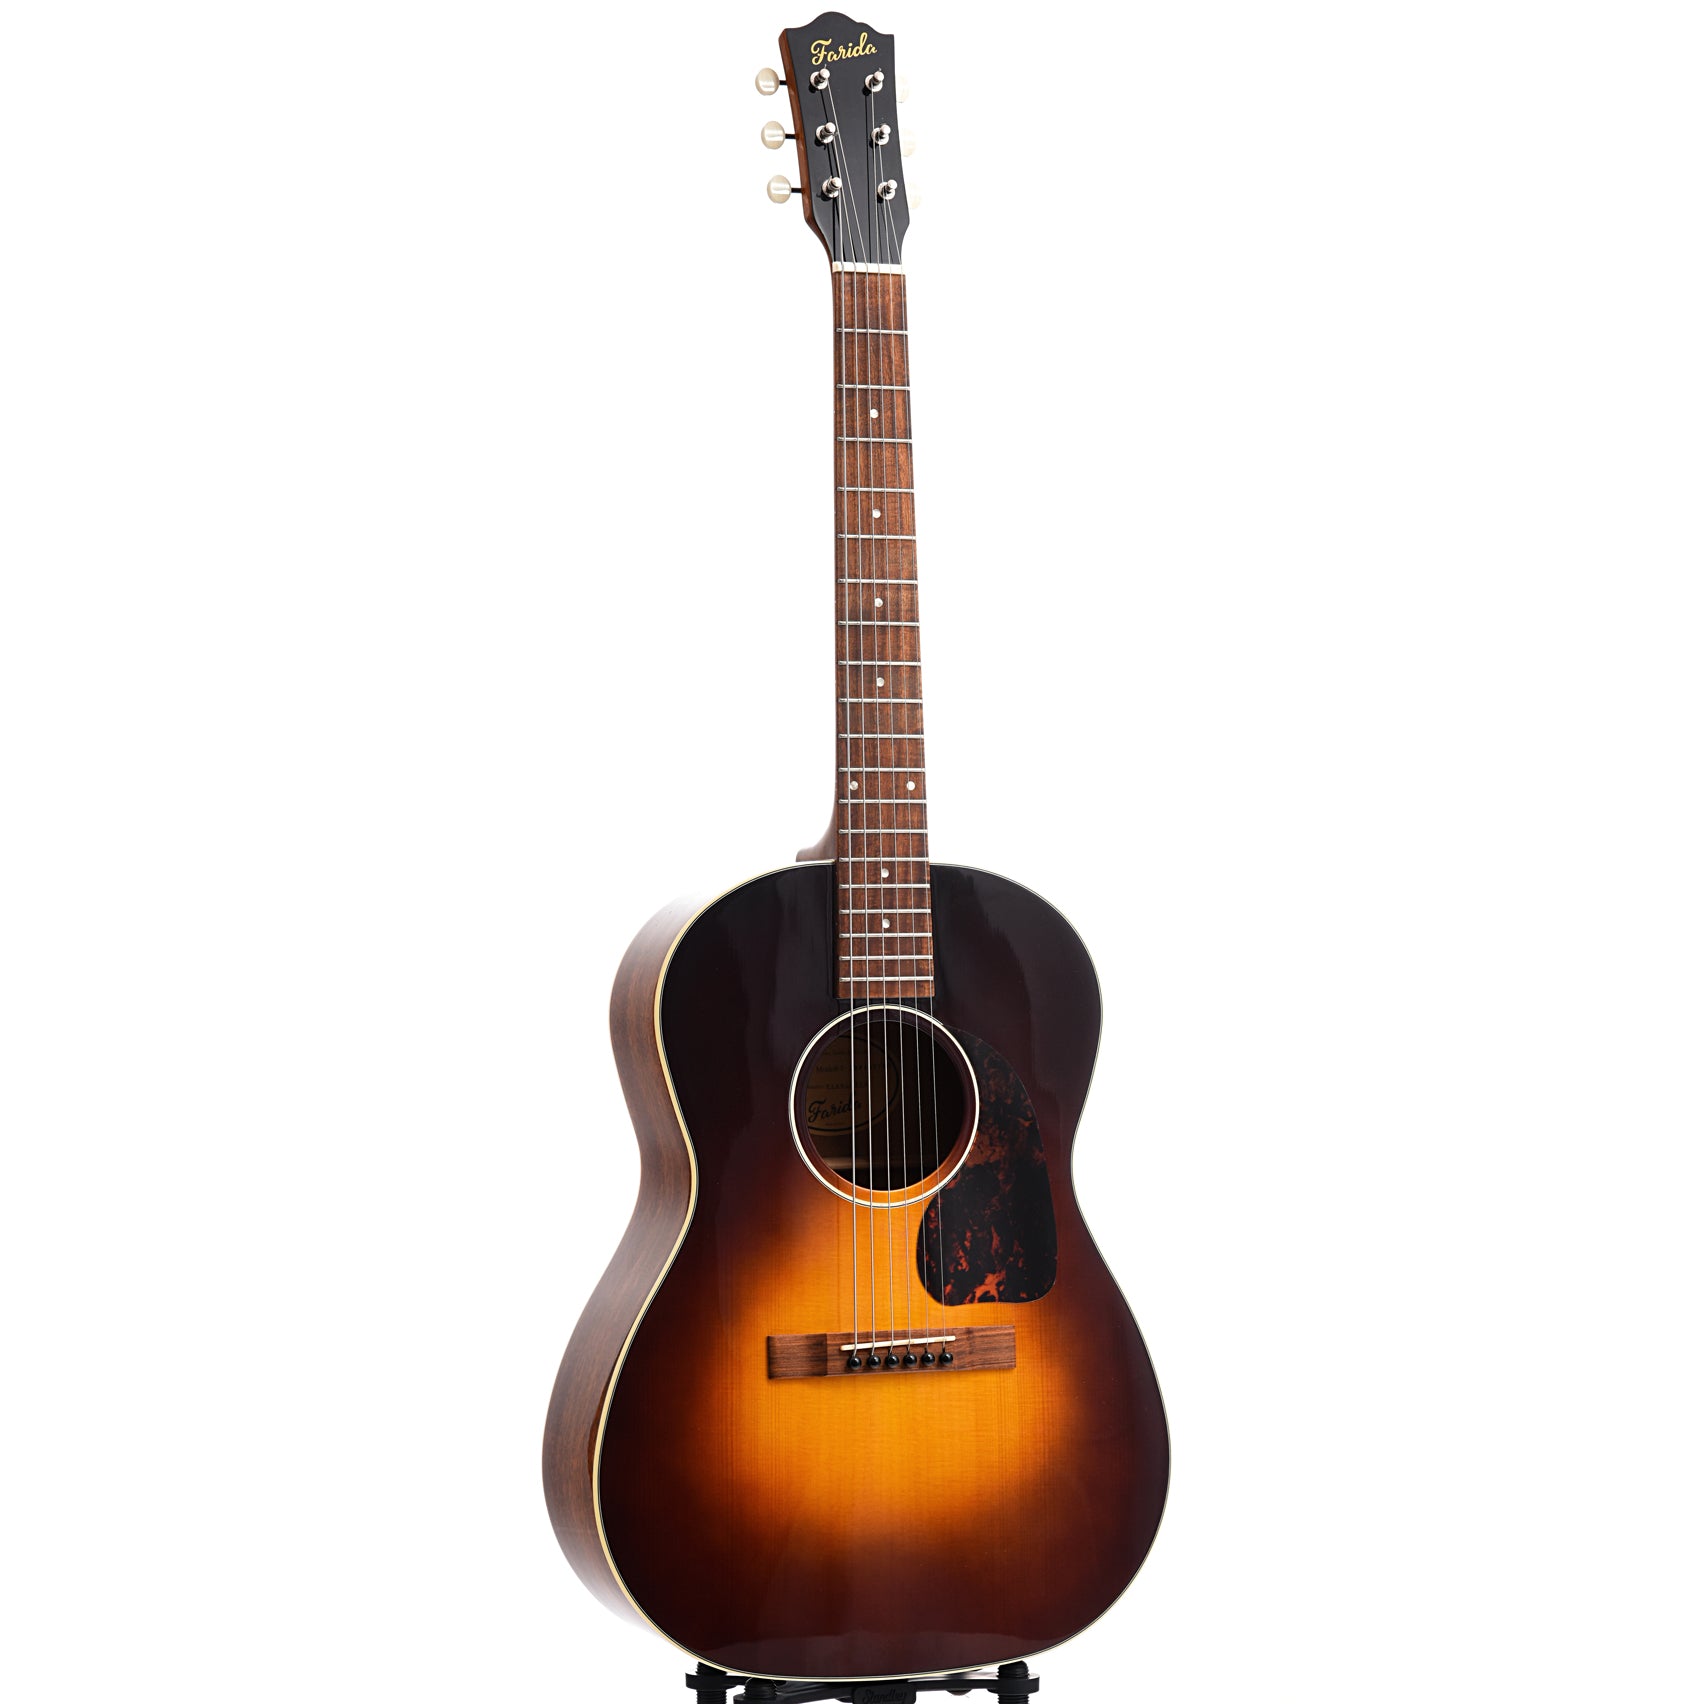 Farida Old Town Series OT-22 Wide VBS Acoustic Guitar – Elderly 